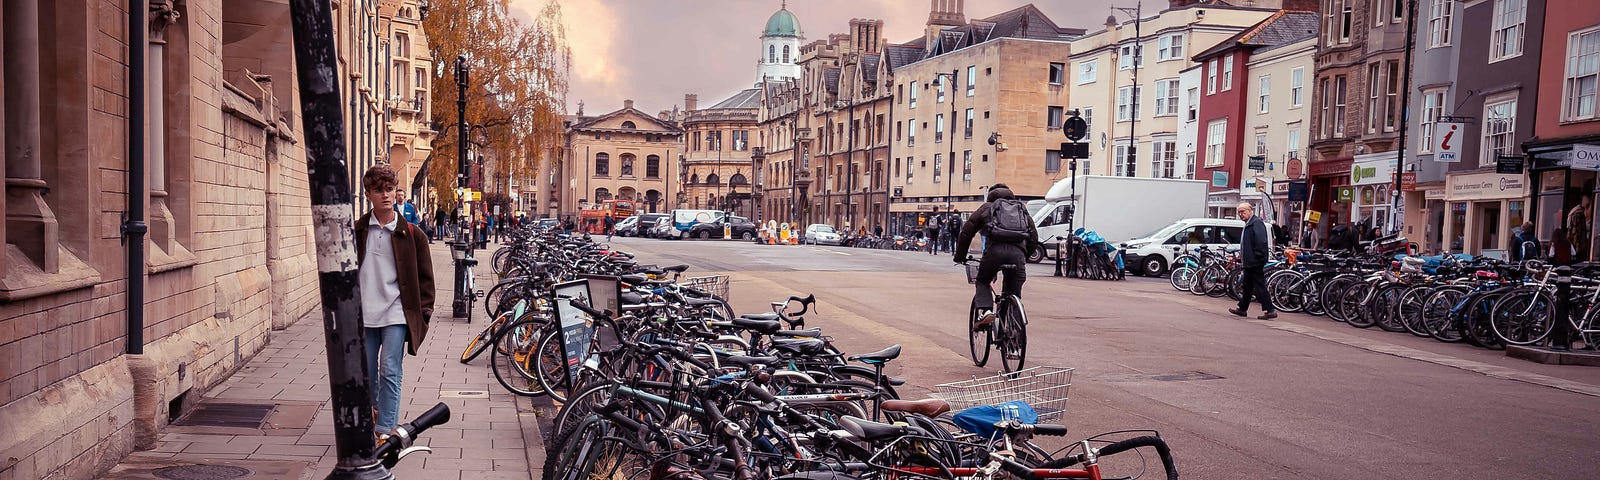 A city street in Oxford, England, showing bicycles, and pedestrians-a view representative of life as a traveler without an iPhone.